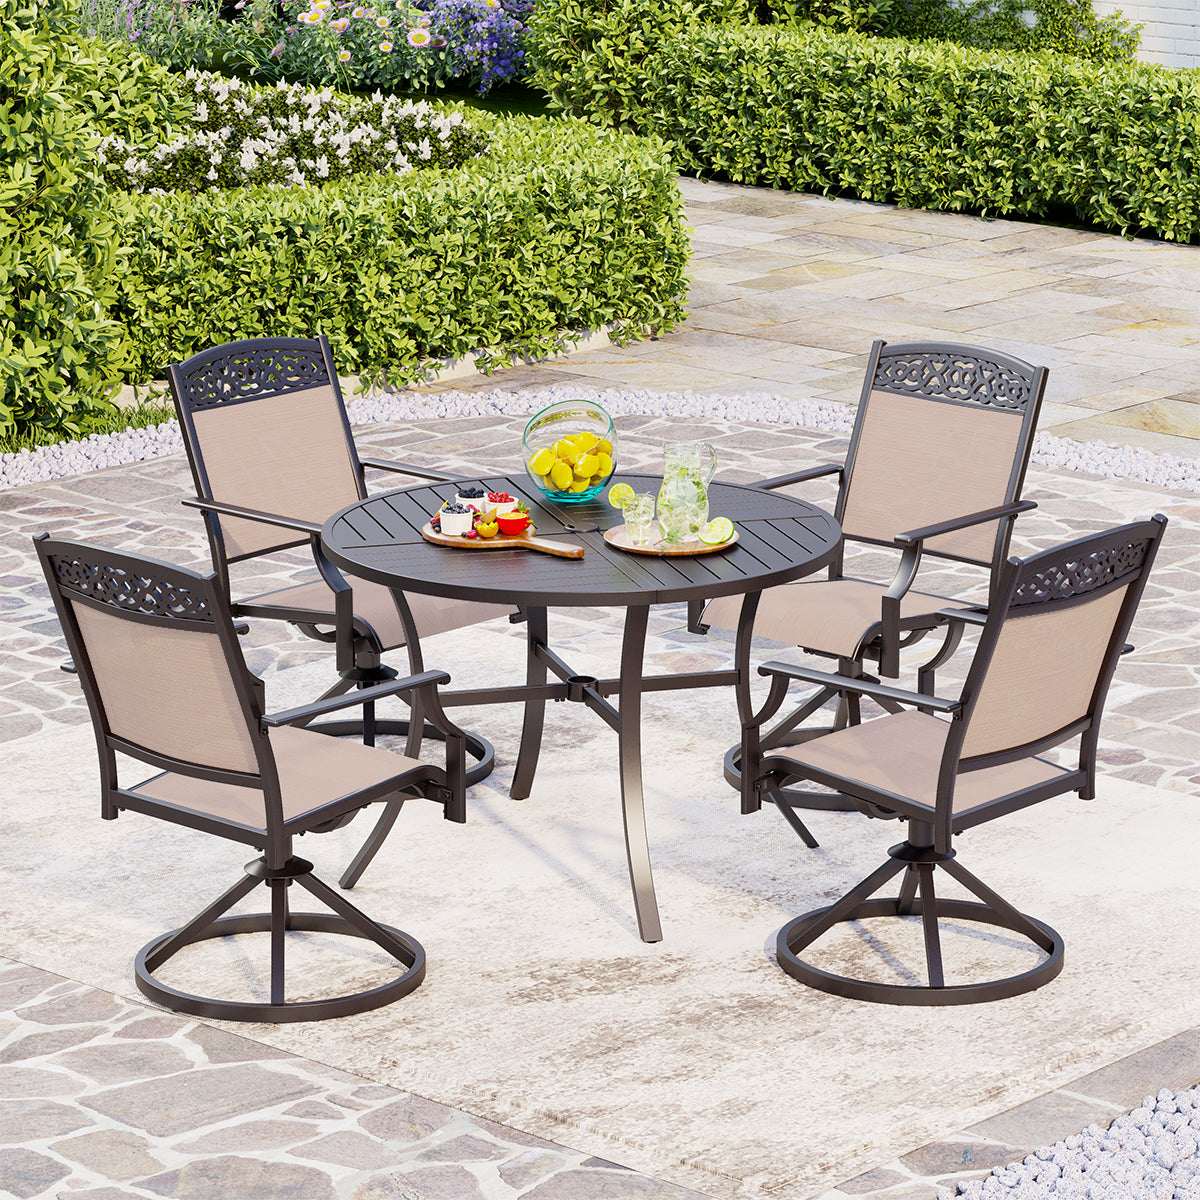 Sophia & William 5-Piece Geometrically Stamped Round Table & Cast Aluminum Pattern Textilene Dining Chairs Dining Chairs Outdoor Dining Set